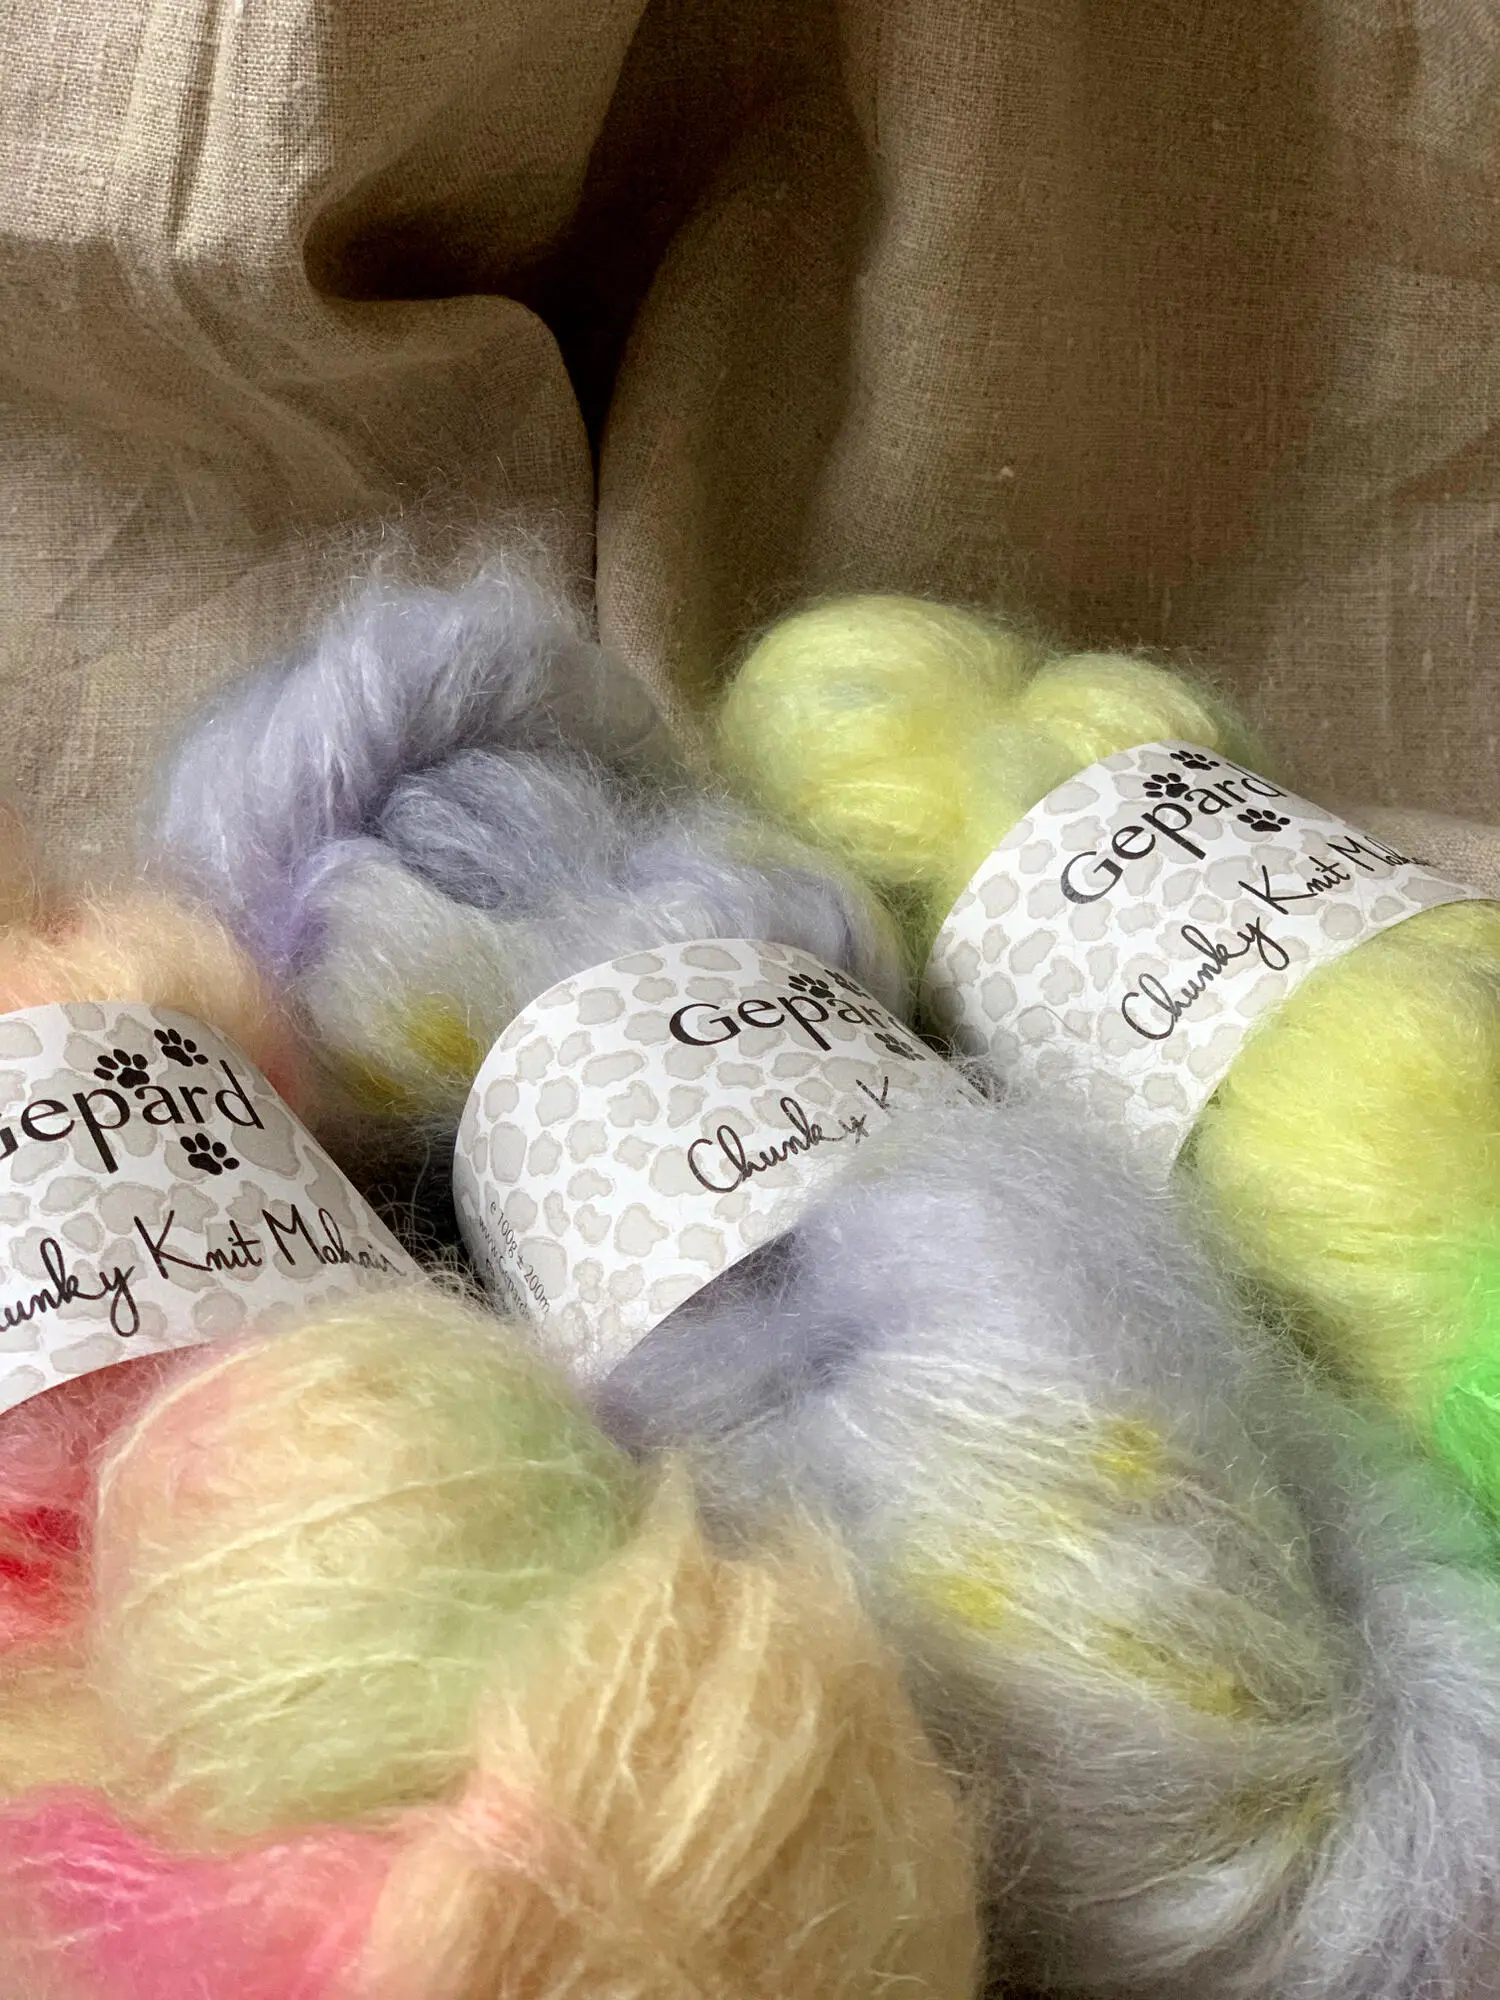 Cashmere Lace is cashmere yarn from Gepard